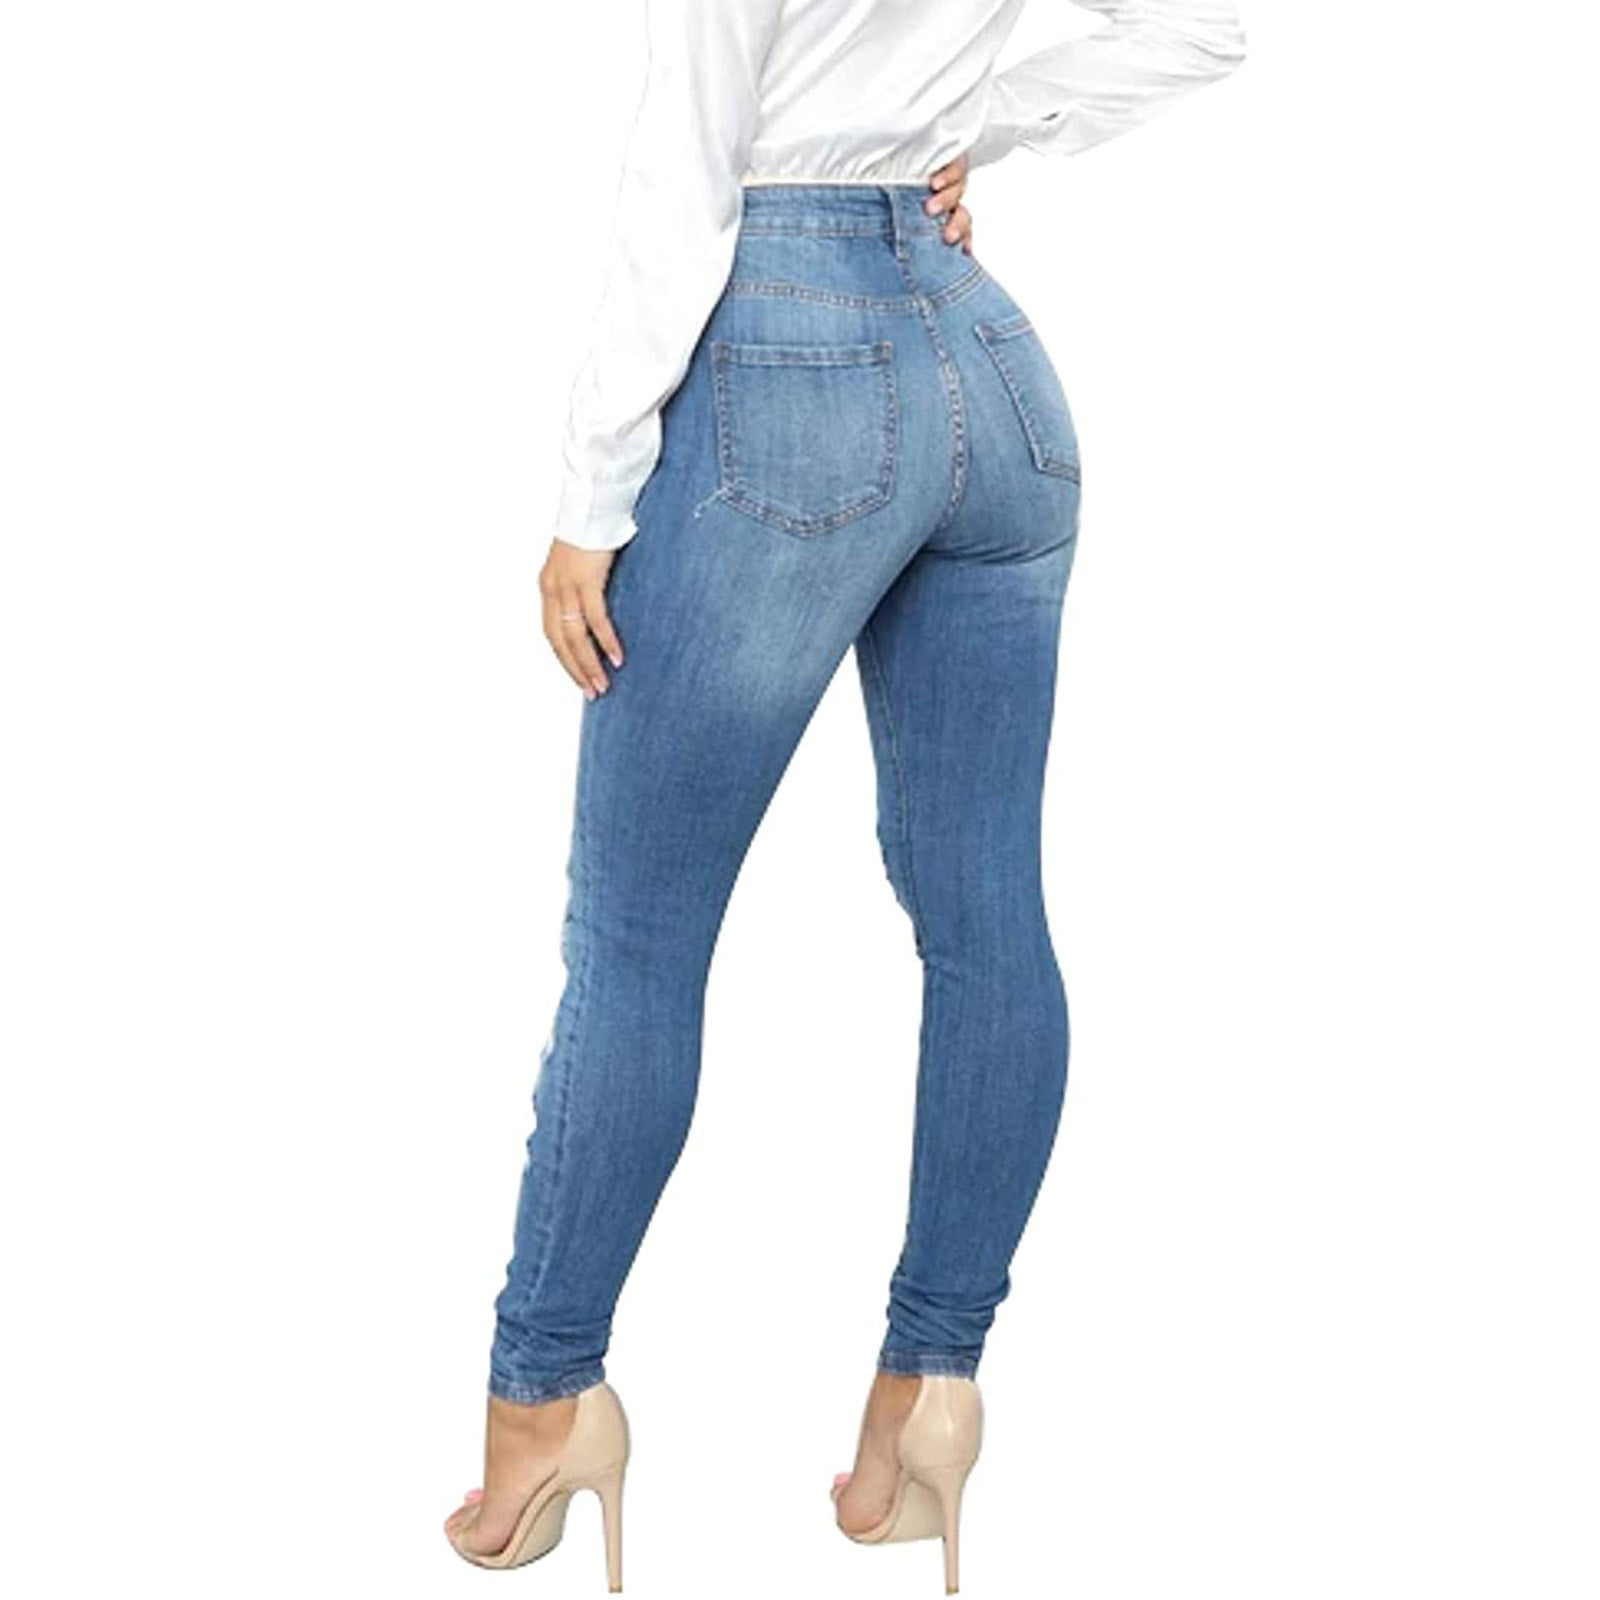 CBGELRT Trendy Jeans for Women High Waist Female Summer Pants Women Women's  High Waisted Ripped Jeans for Women Lift Distressed Stretch Skinny Jeans 